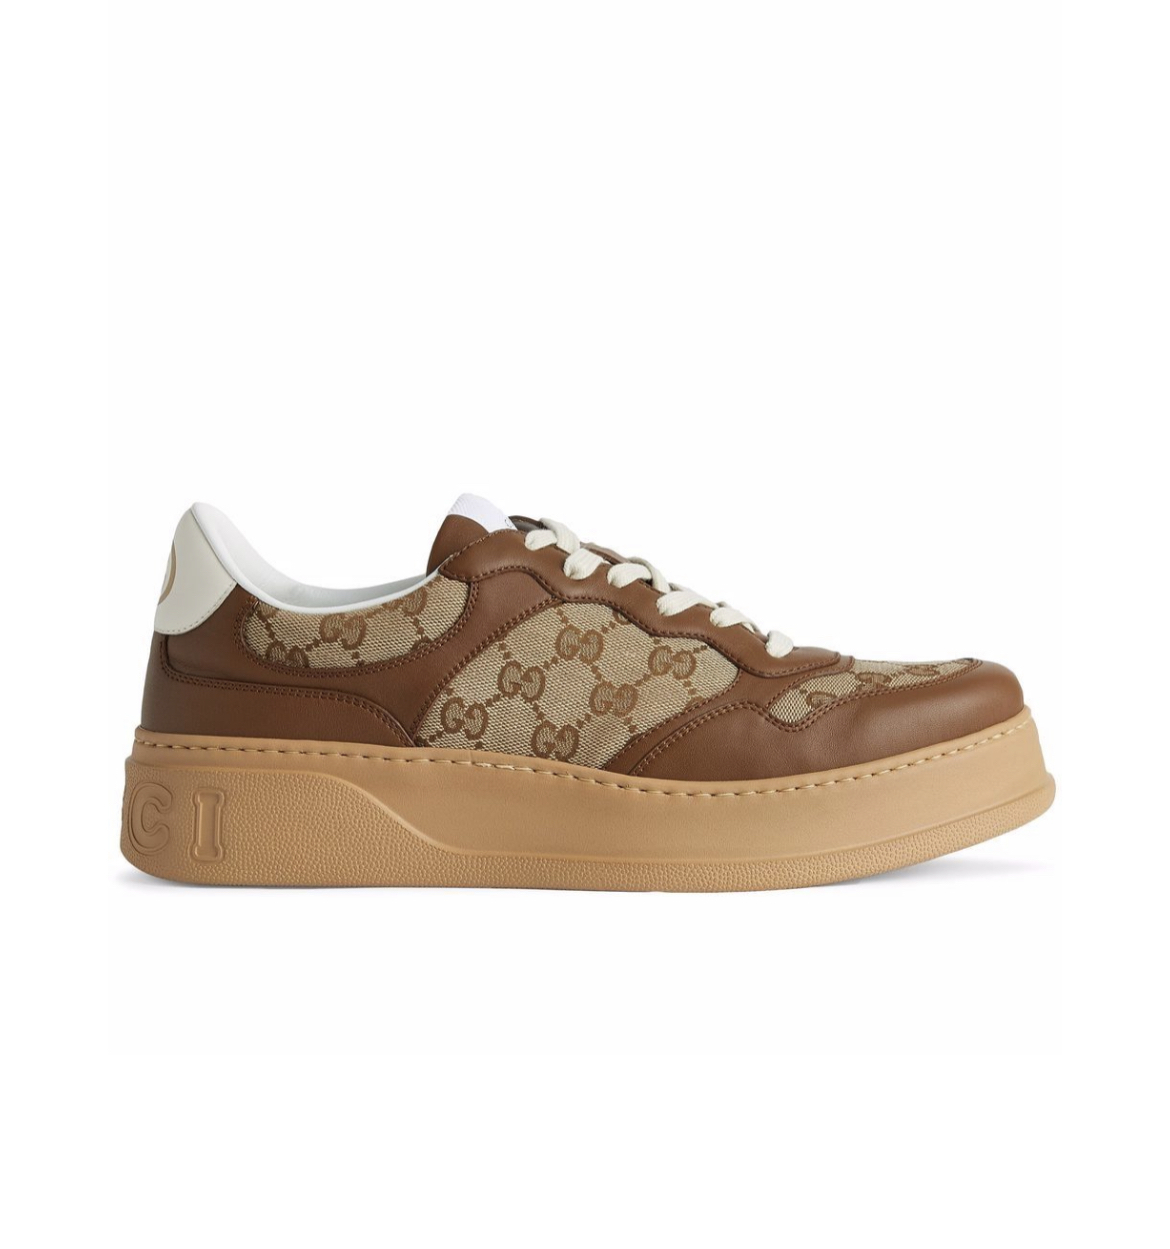 Shop GUCCI Outlet Low-Top Sneakers by BuyDE